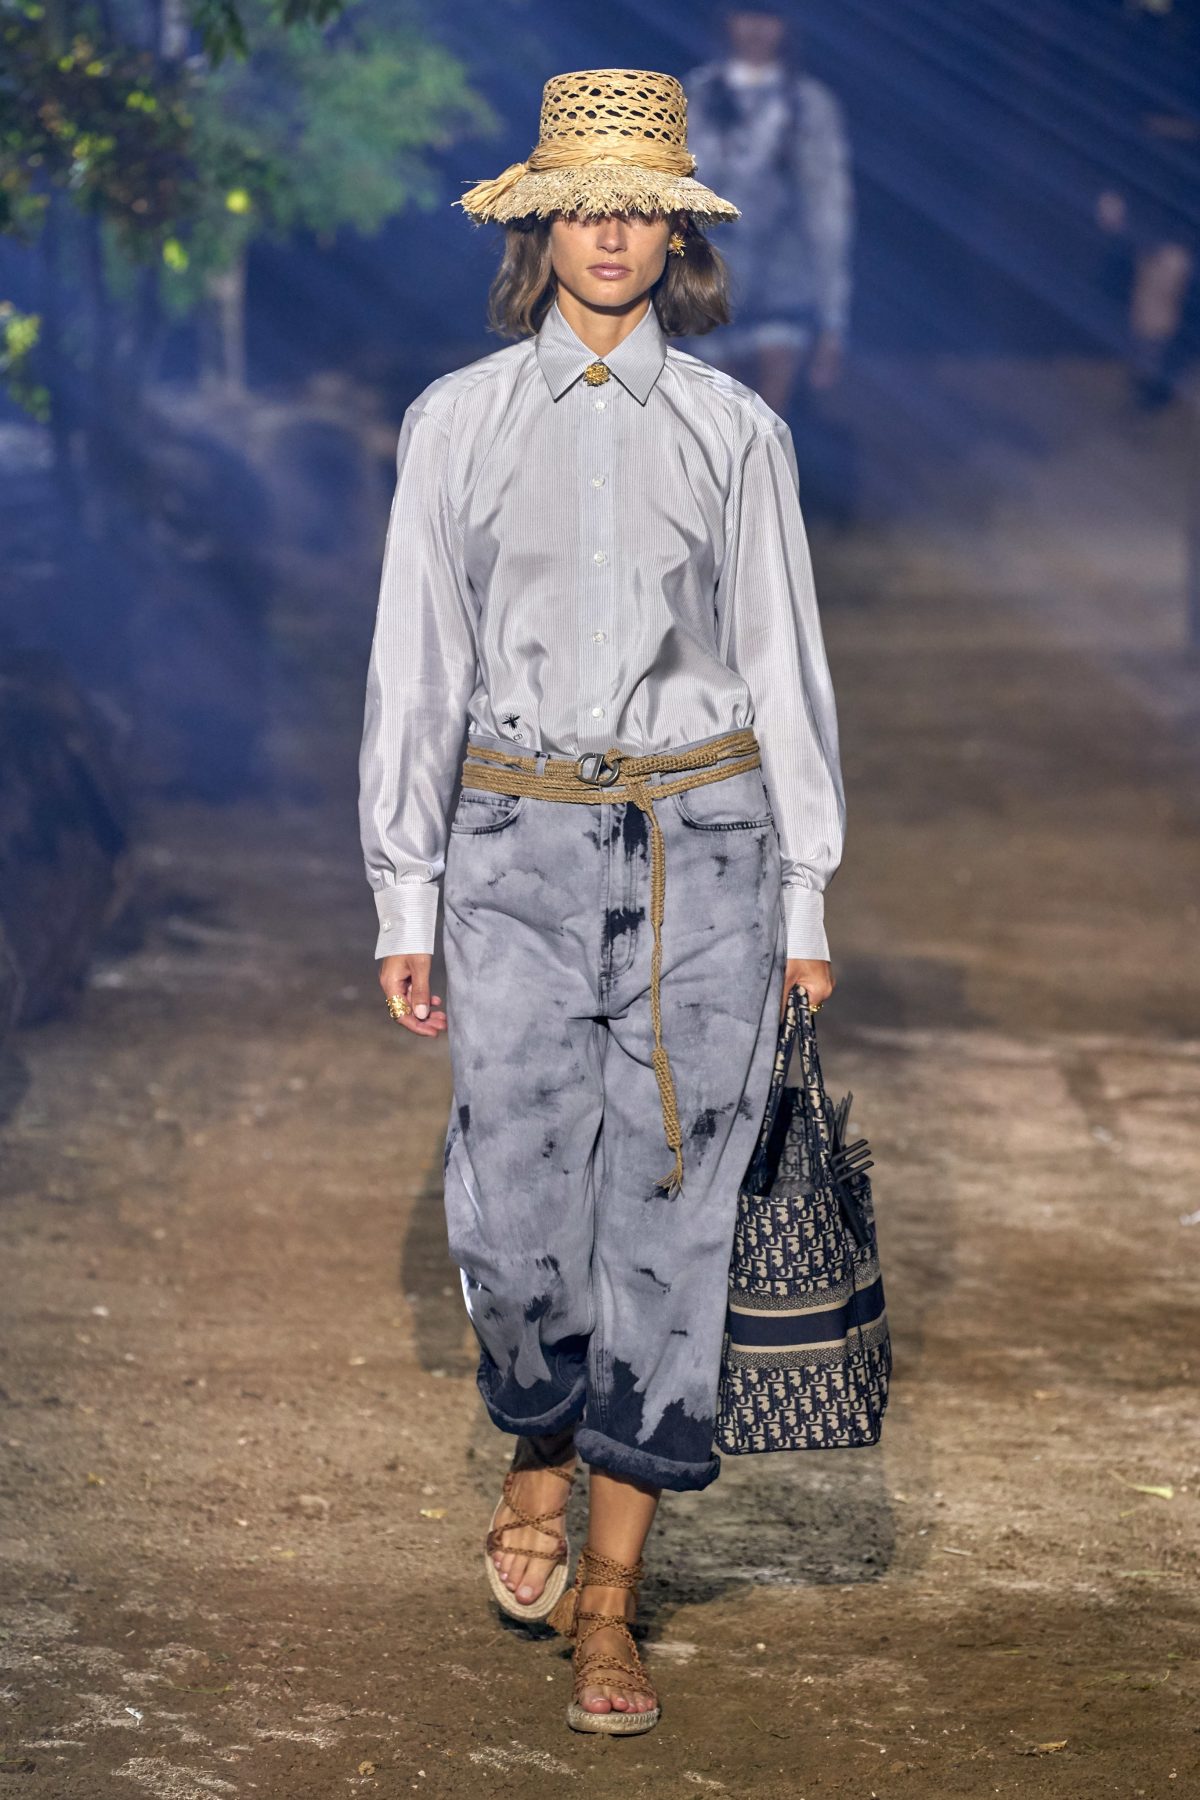 Christian Dior Spring 2020 Ready-to-Wear Collection - Vogue